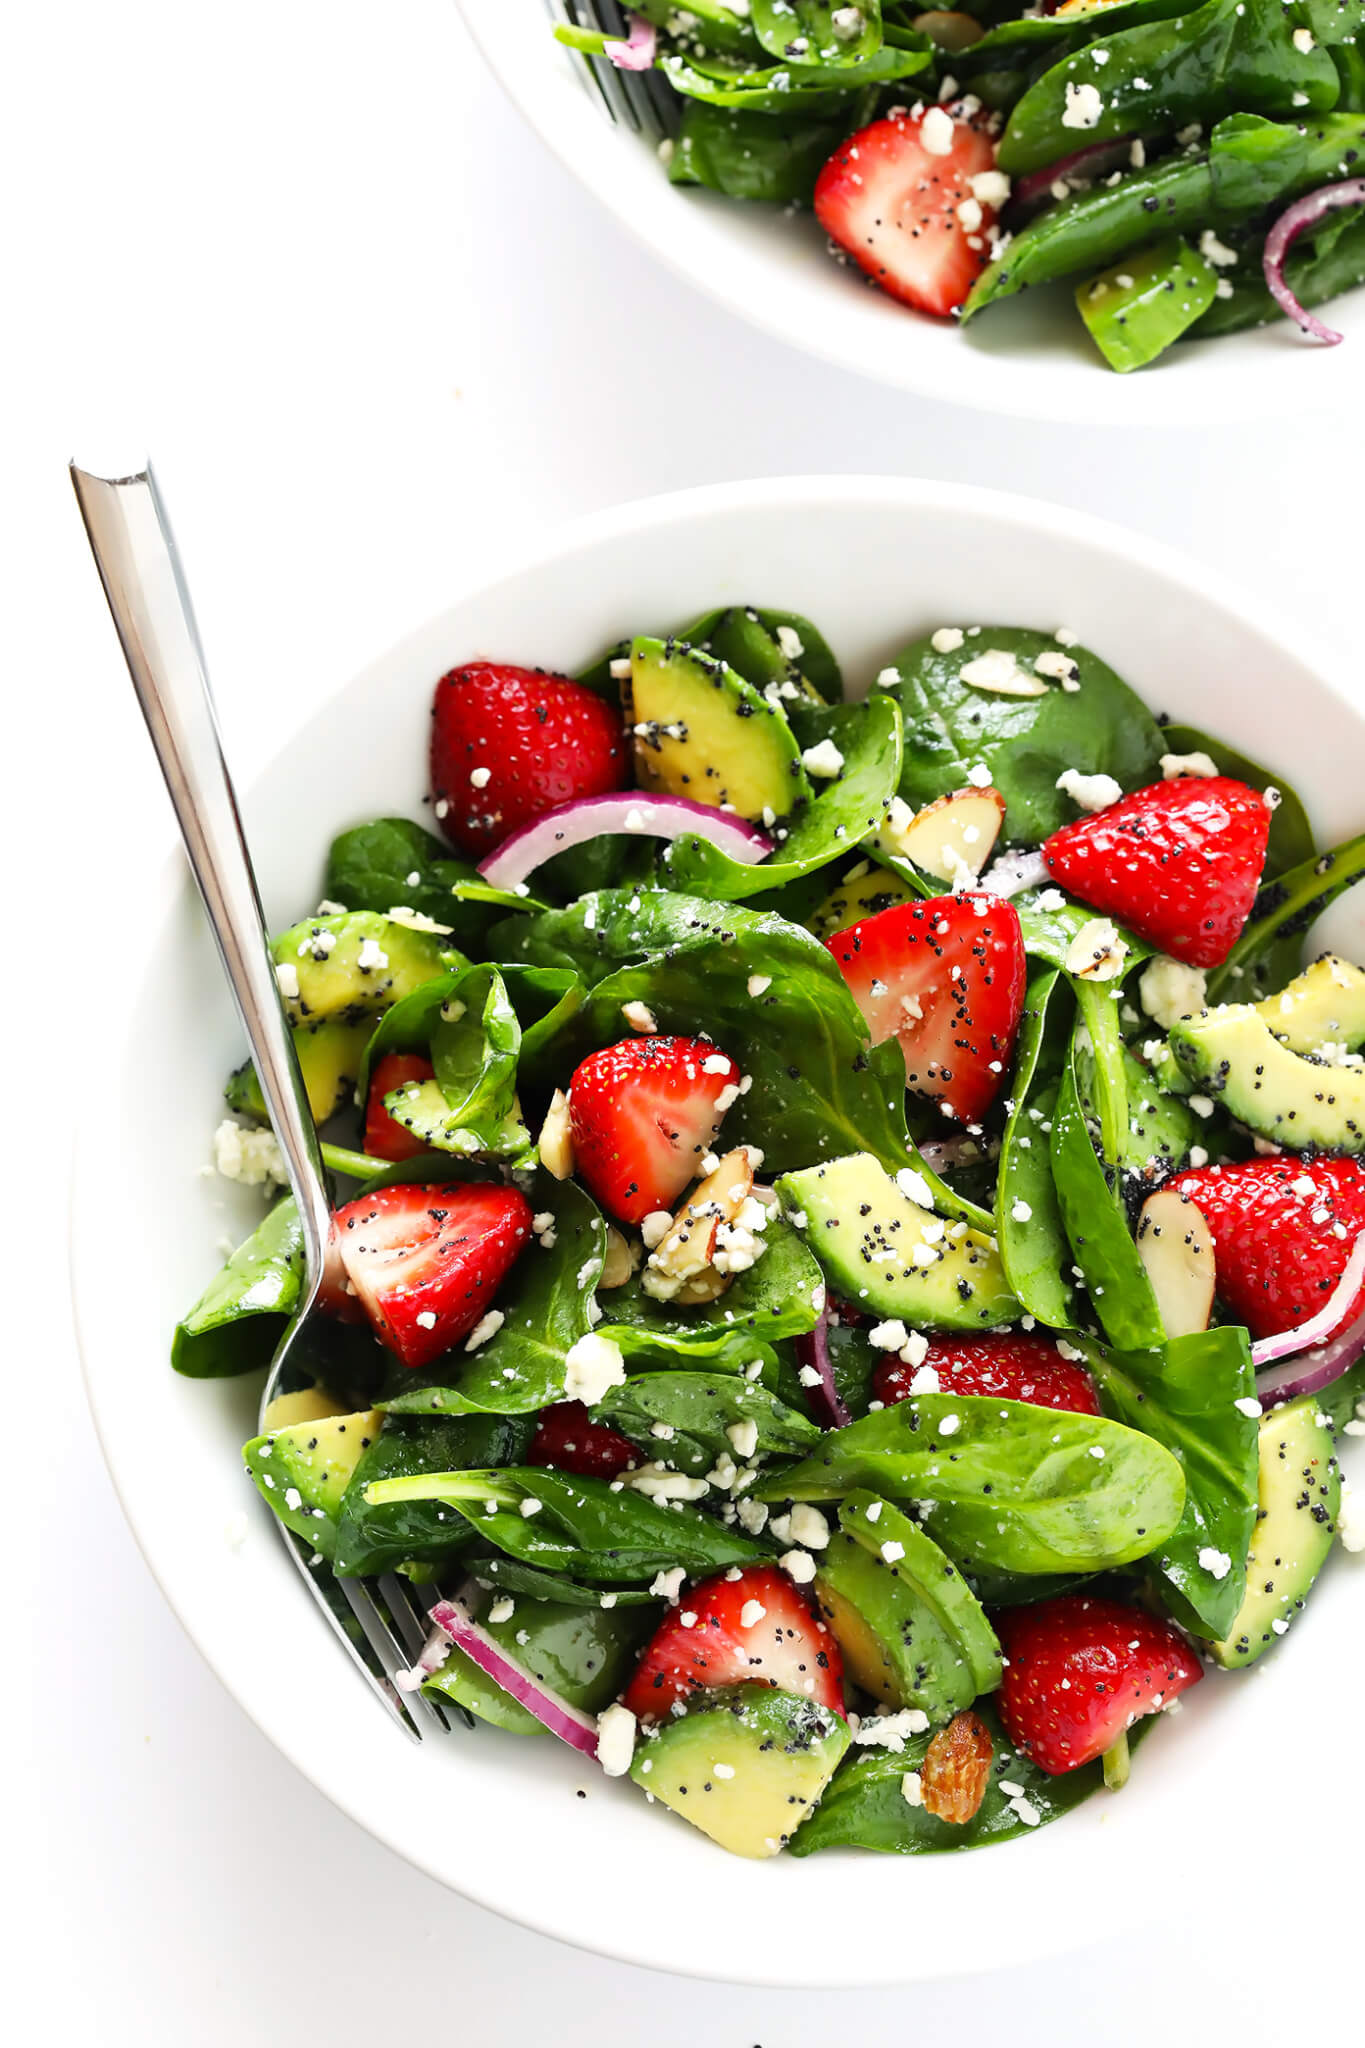 5 Delicious Summer Salad Recipes You Need to Try This Week